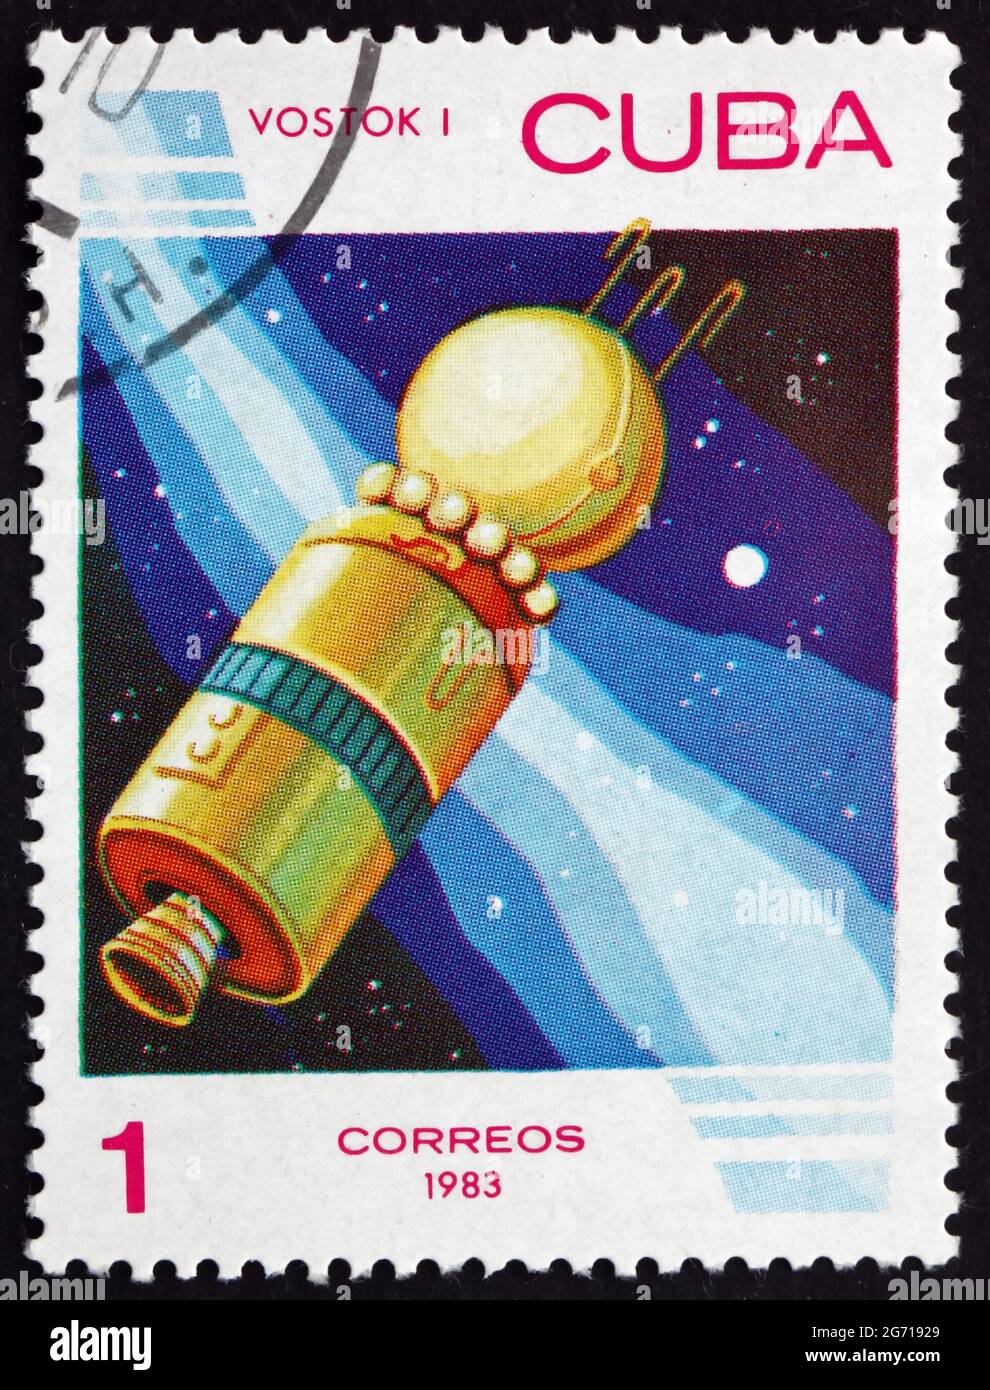 CUBA - CIRCA 1983: a stamp printed in the Cuba shows Vostok 1, the First Human Spaceflight in History, circa 1983 Stock Photo